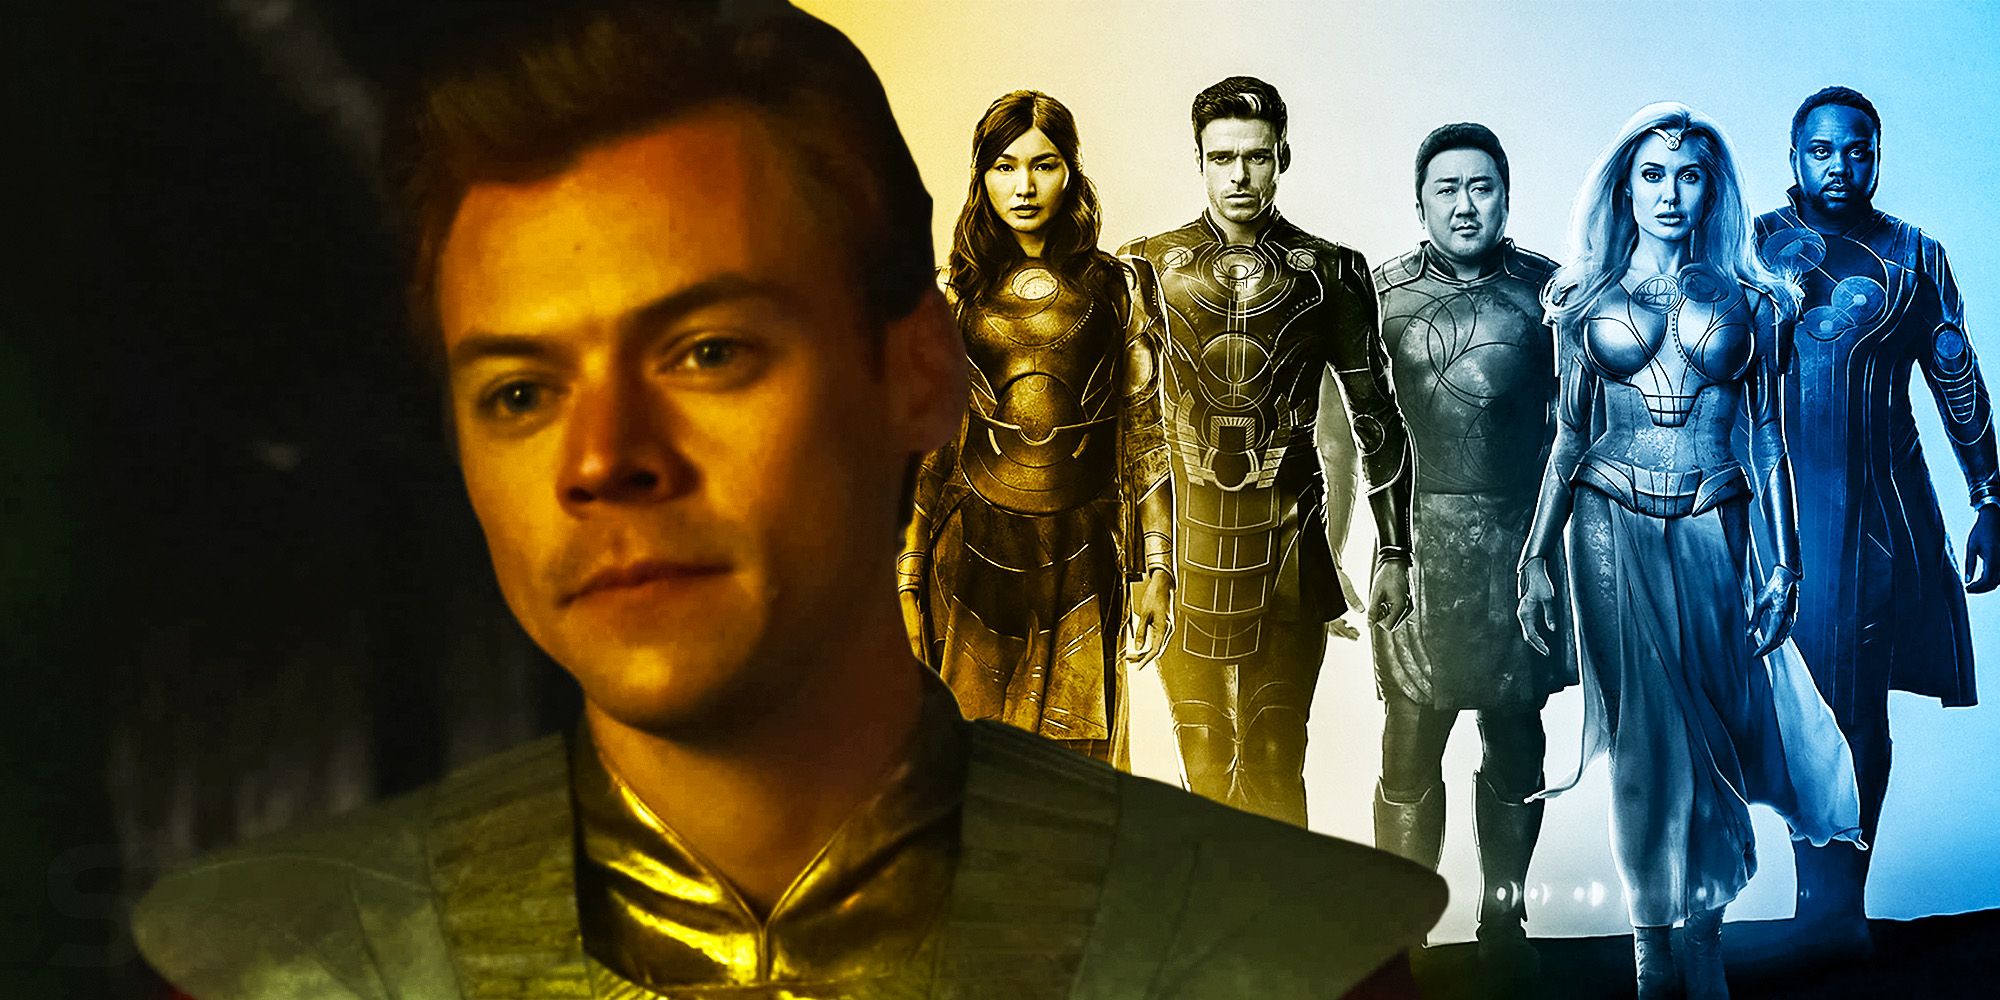 Harry Styles' Eros from Eternals has one of the most disturbing Marvel  Comics histories